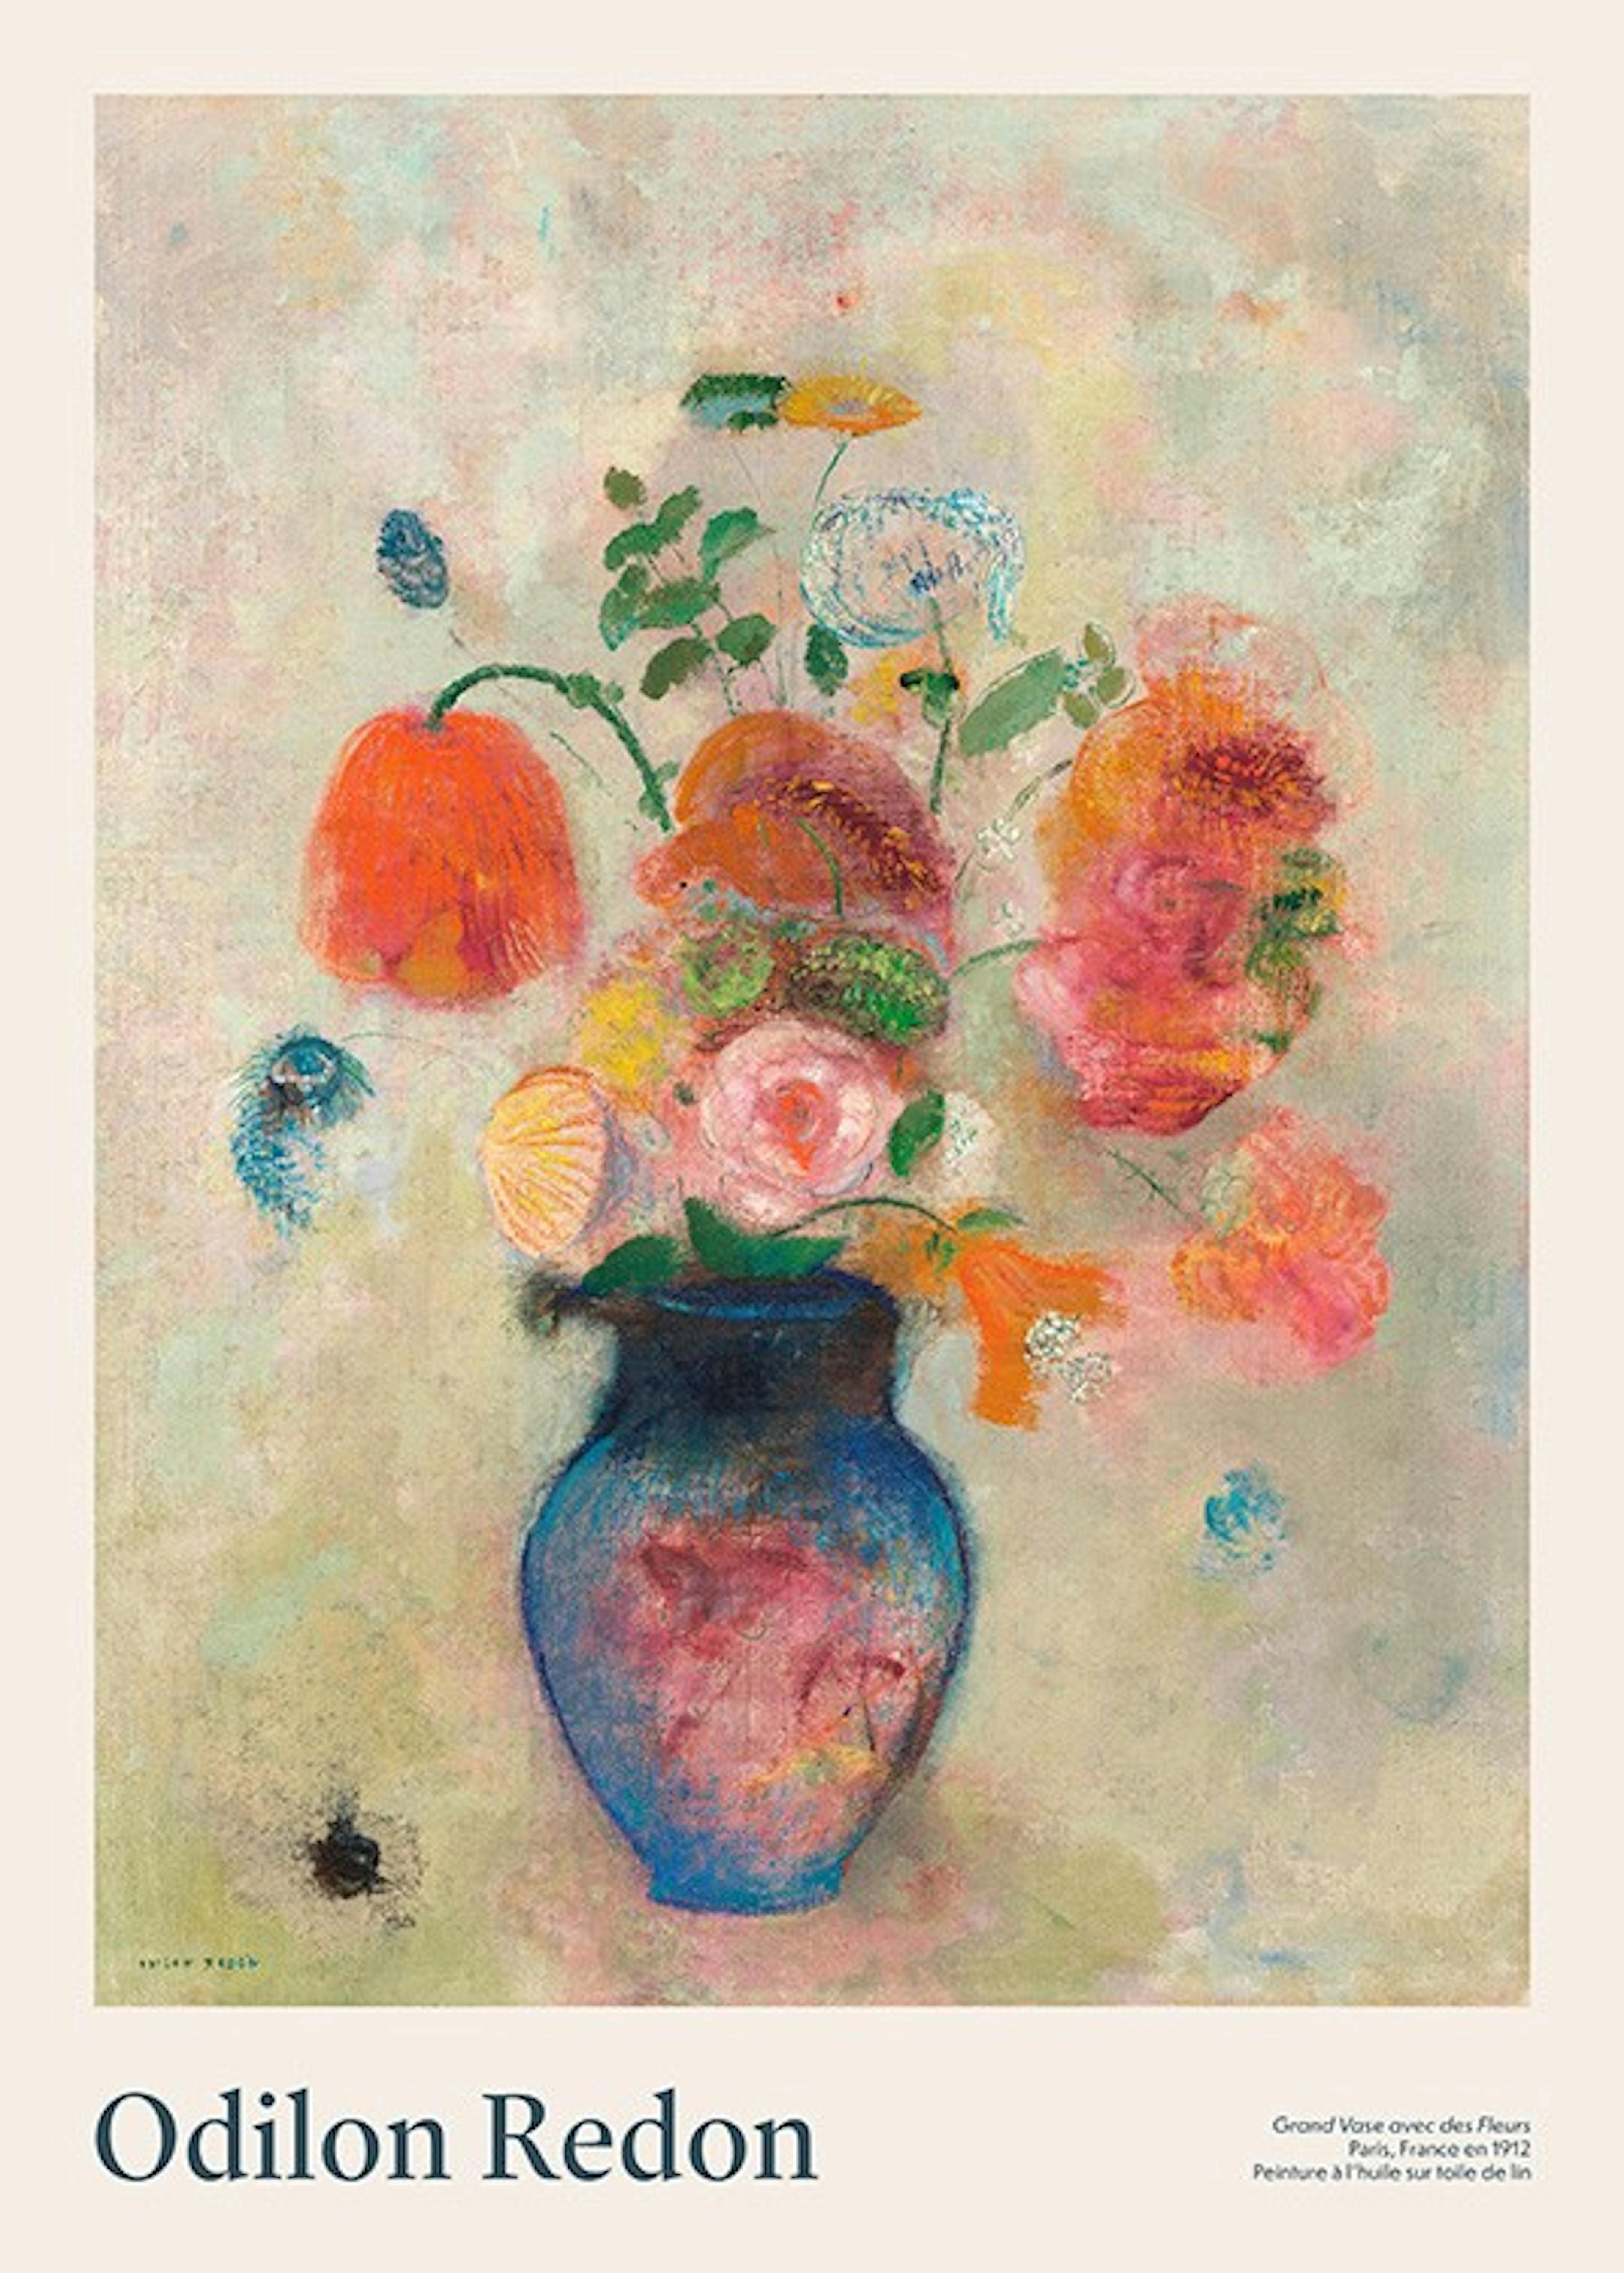 Odilon Redon - Large Vase with Flowers Poster